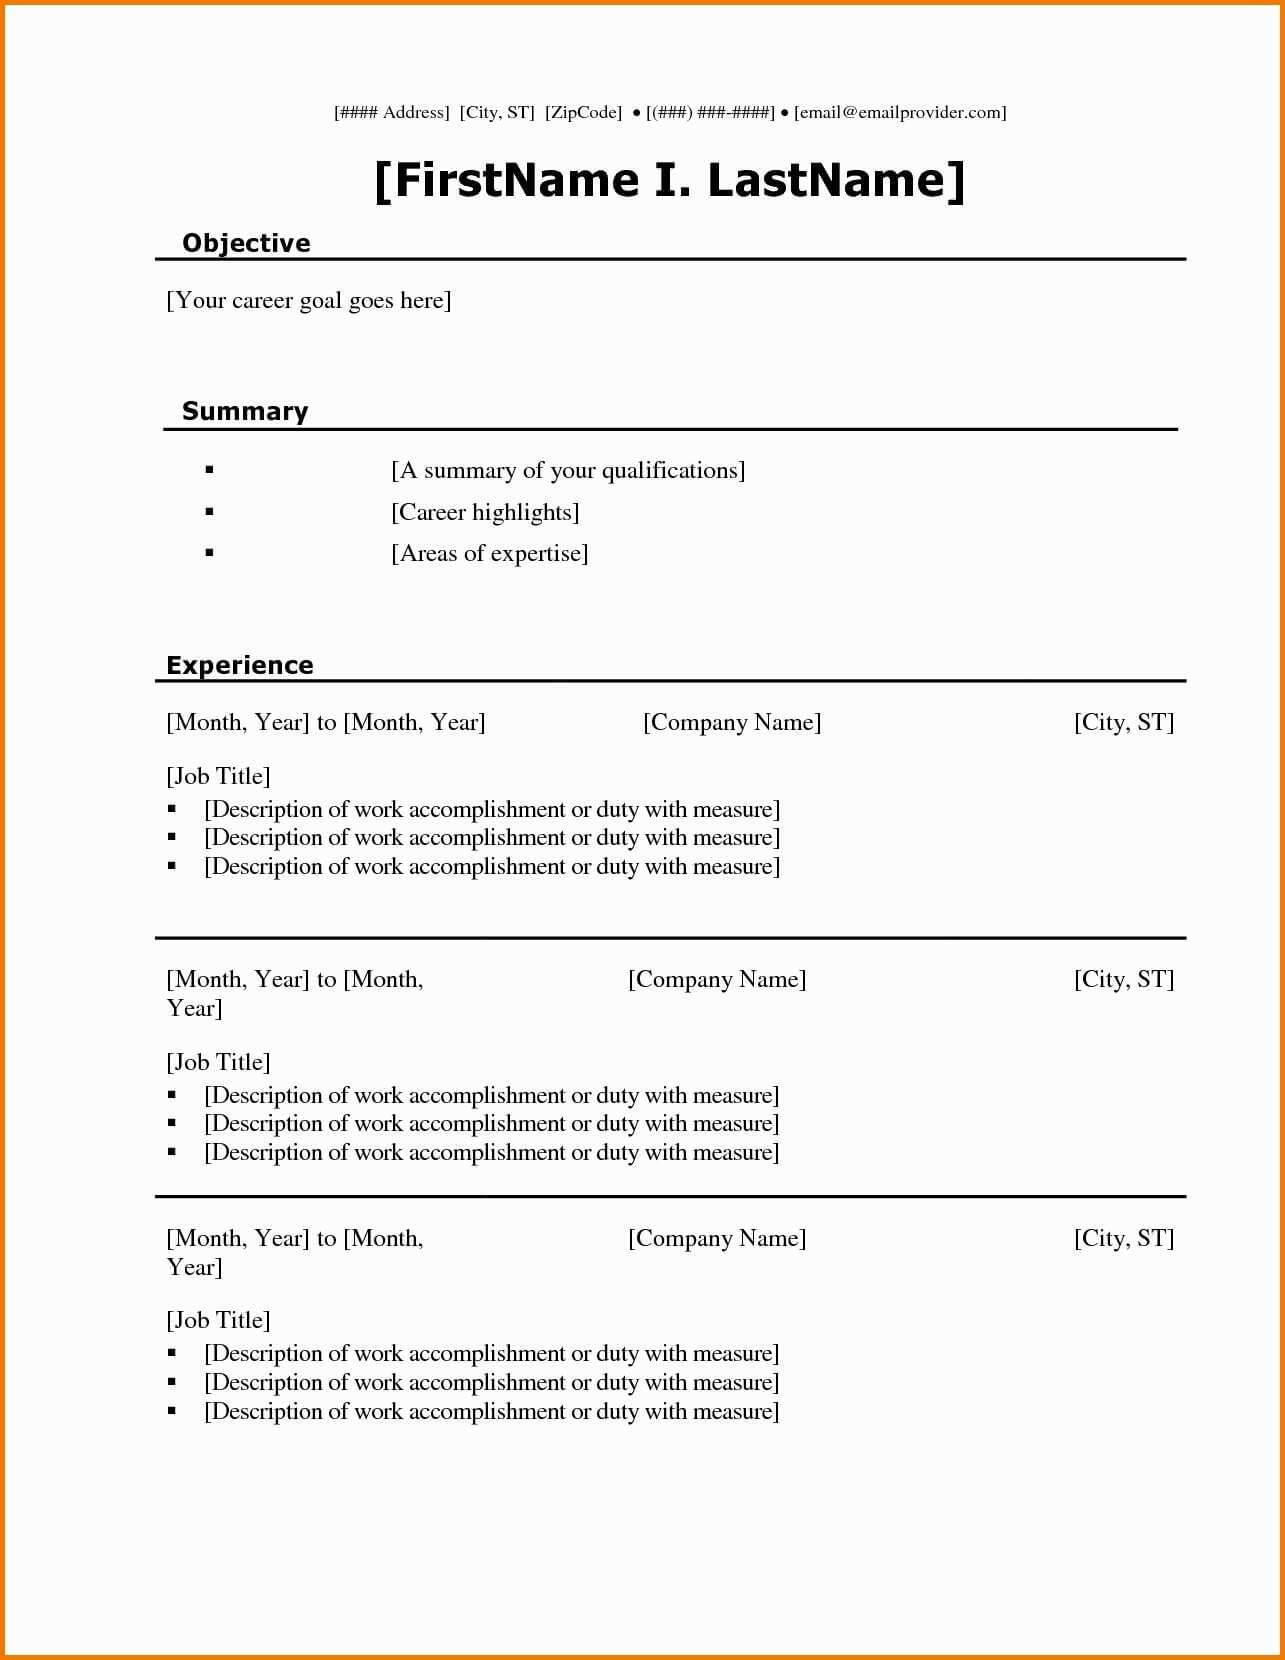 Resume Templates Word 2013 Awesome Template Mi ~ Curbshoppe Within Resume Templates Word 2013